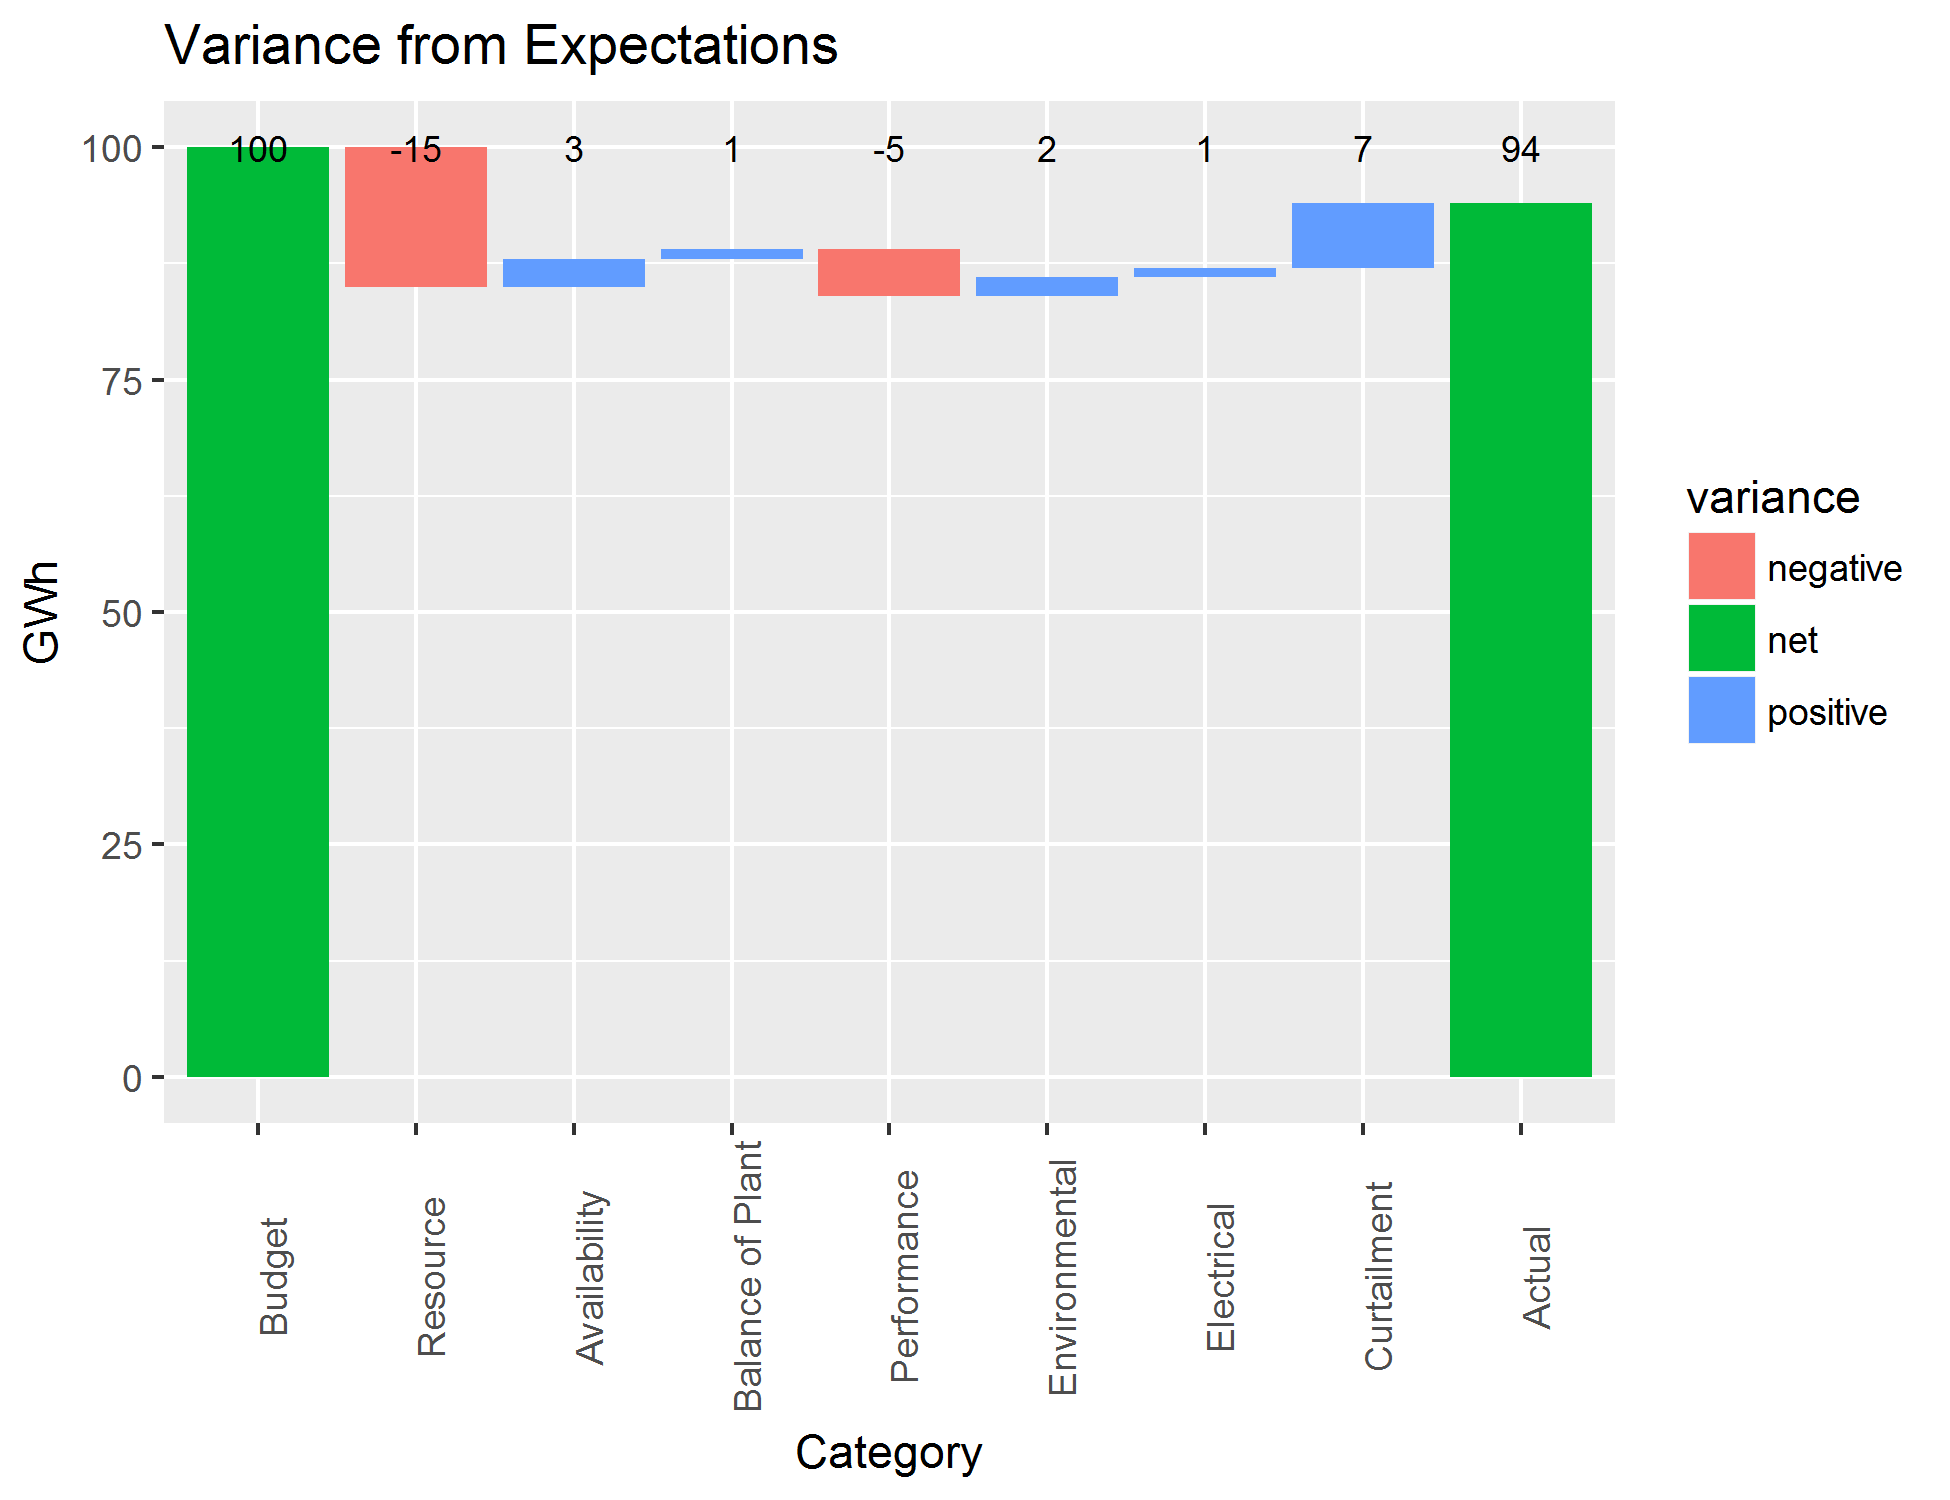 Variance analysis results